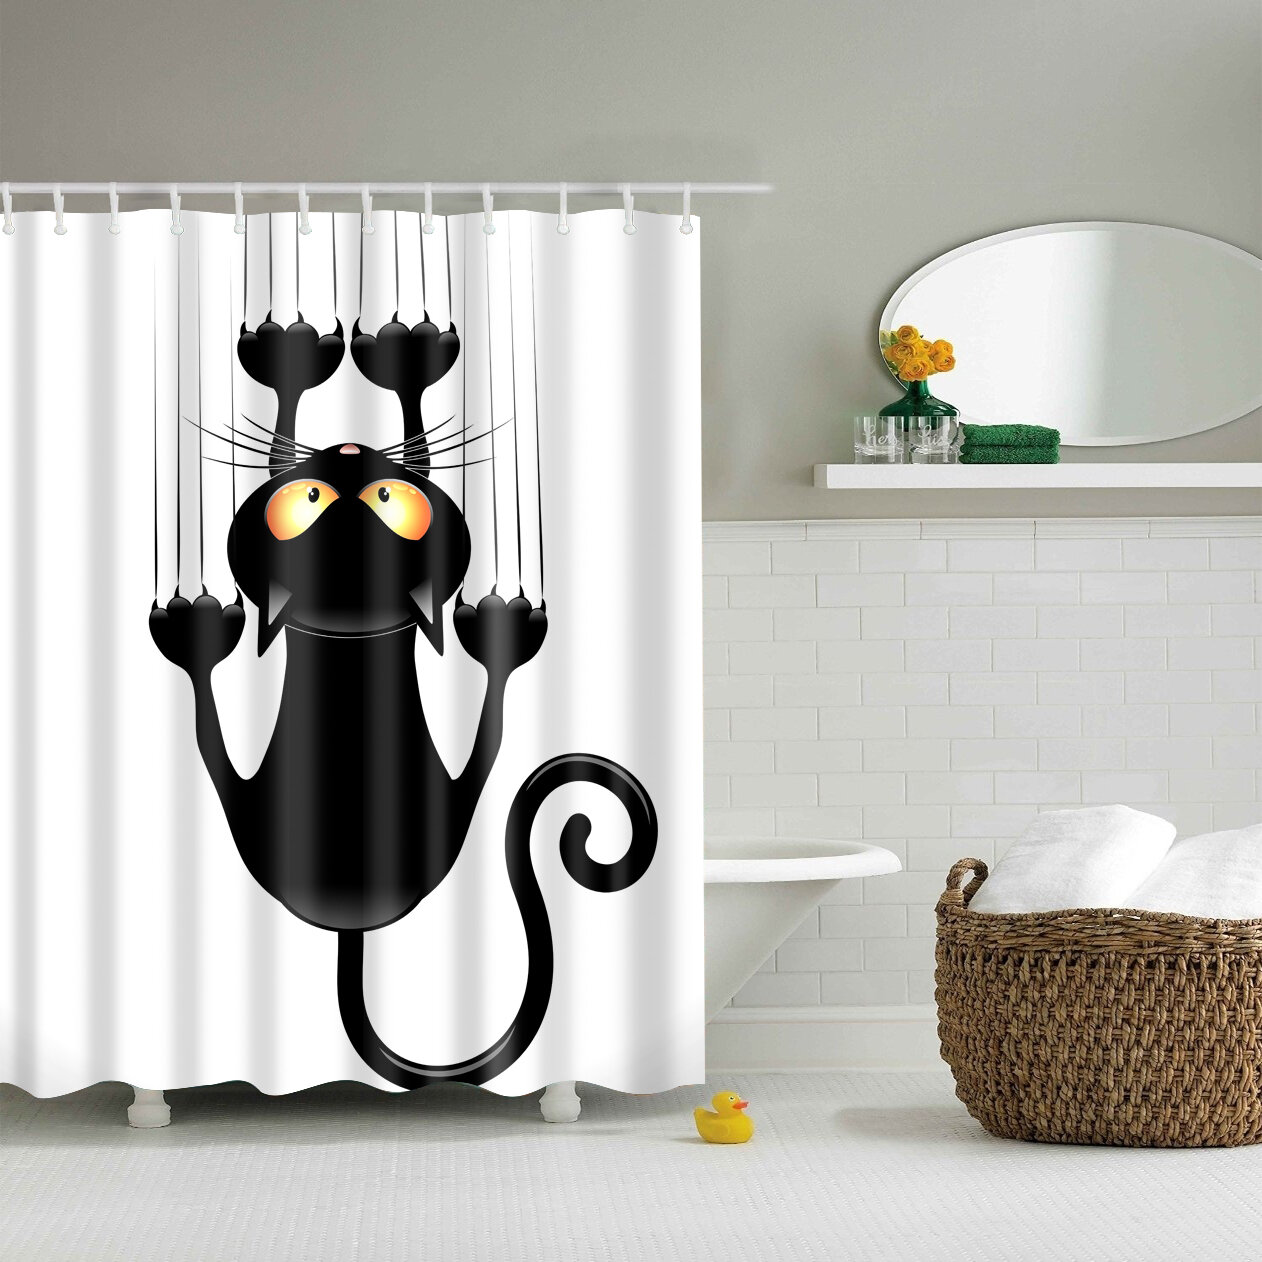 

180x180cm The Cartoon Bathroom Fabric Shower Curtain Waterproof Polyester With 12 Hooks